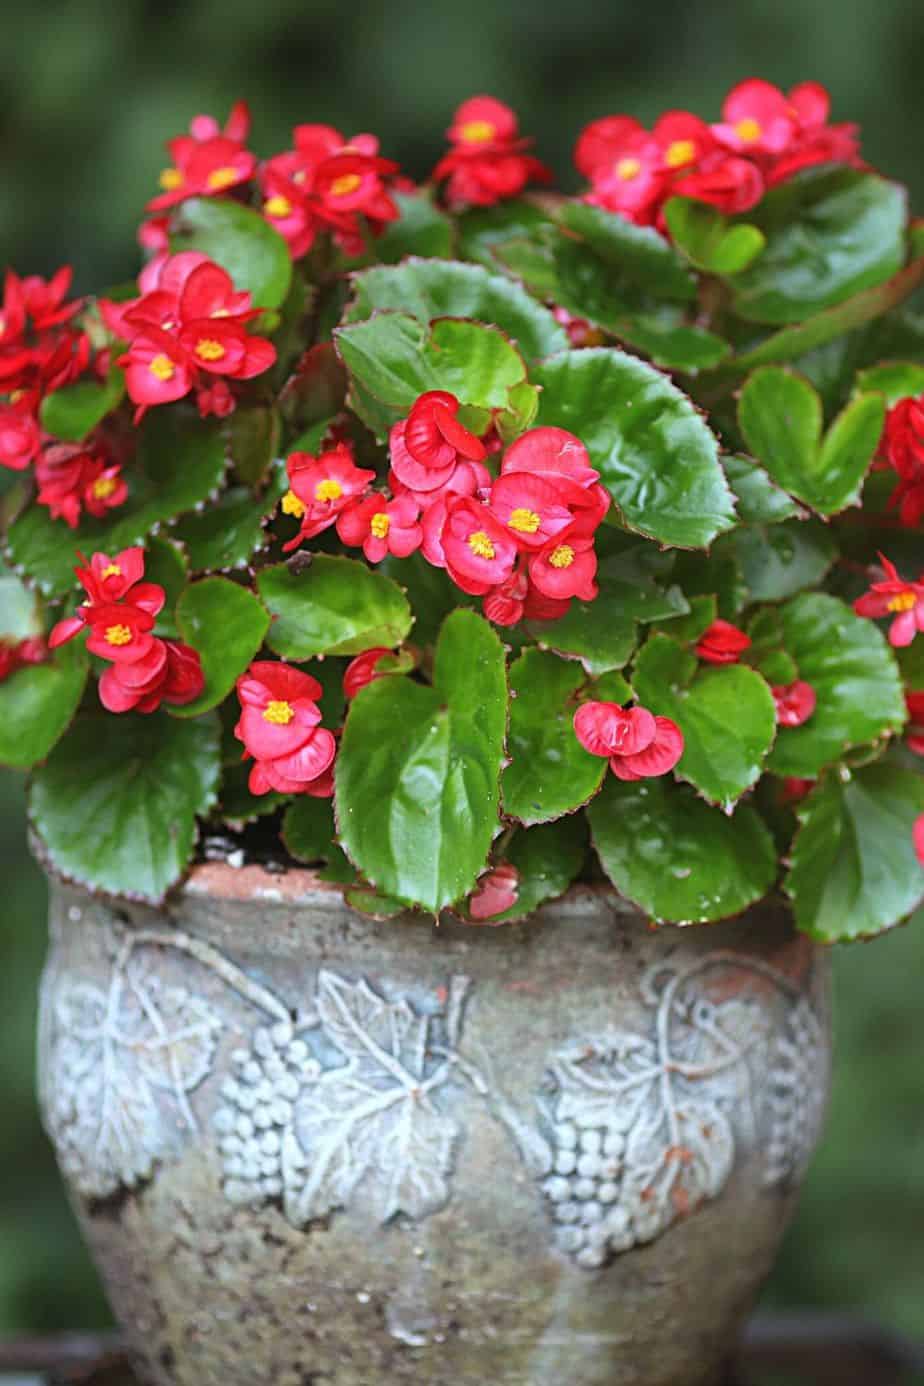 Begonia, like the Arrowhead vine, contains oxalates that causes oral irritation in cats